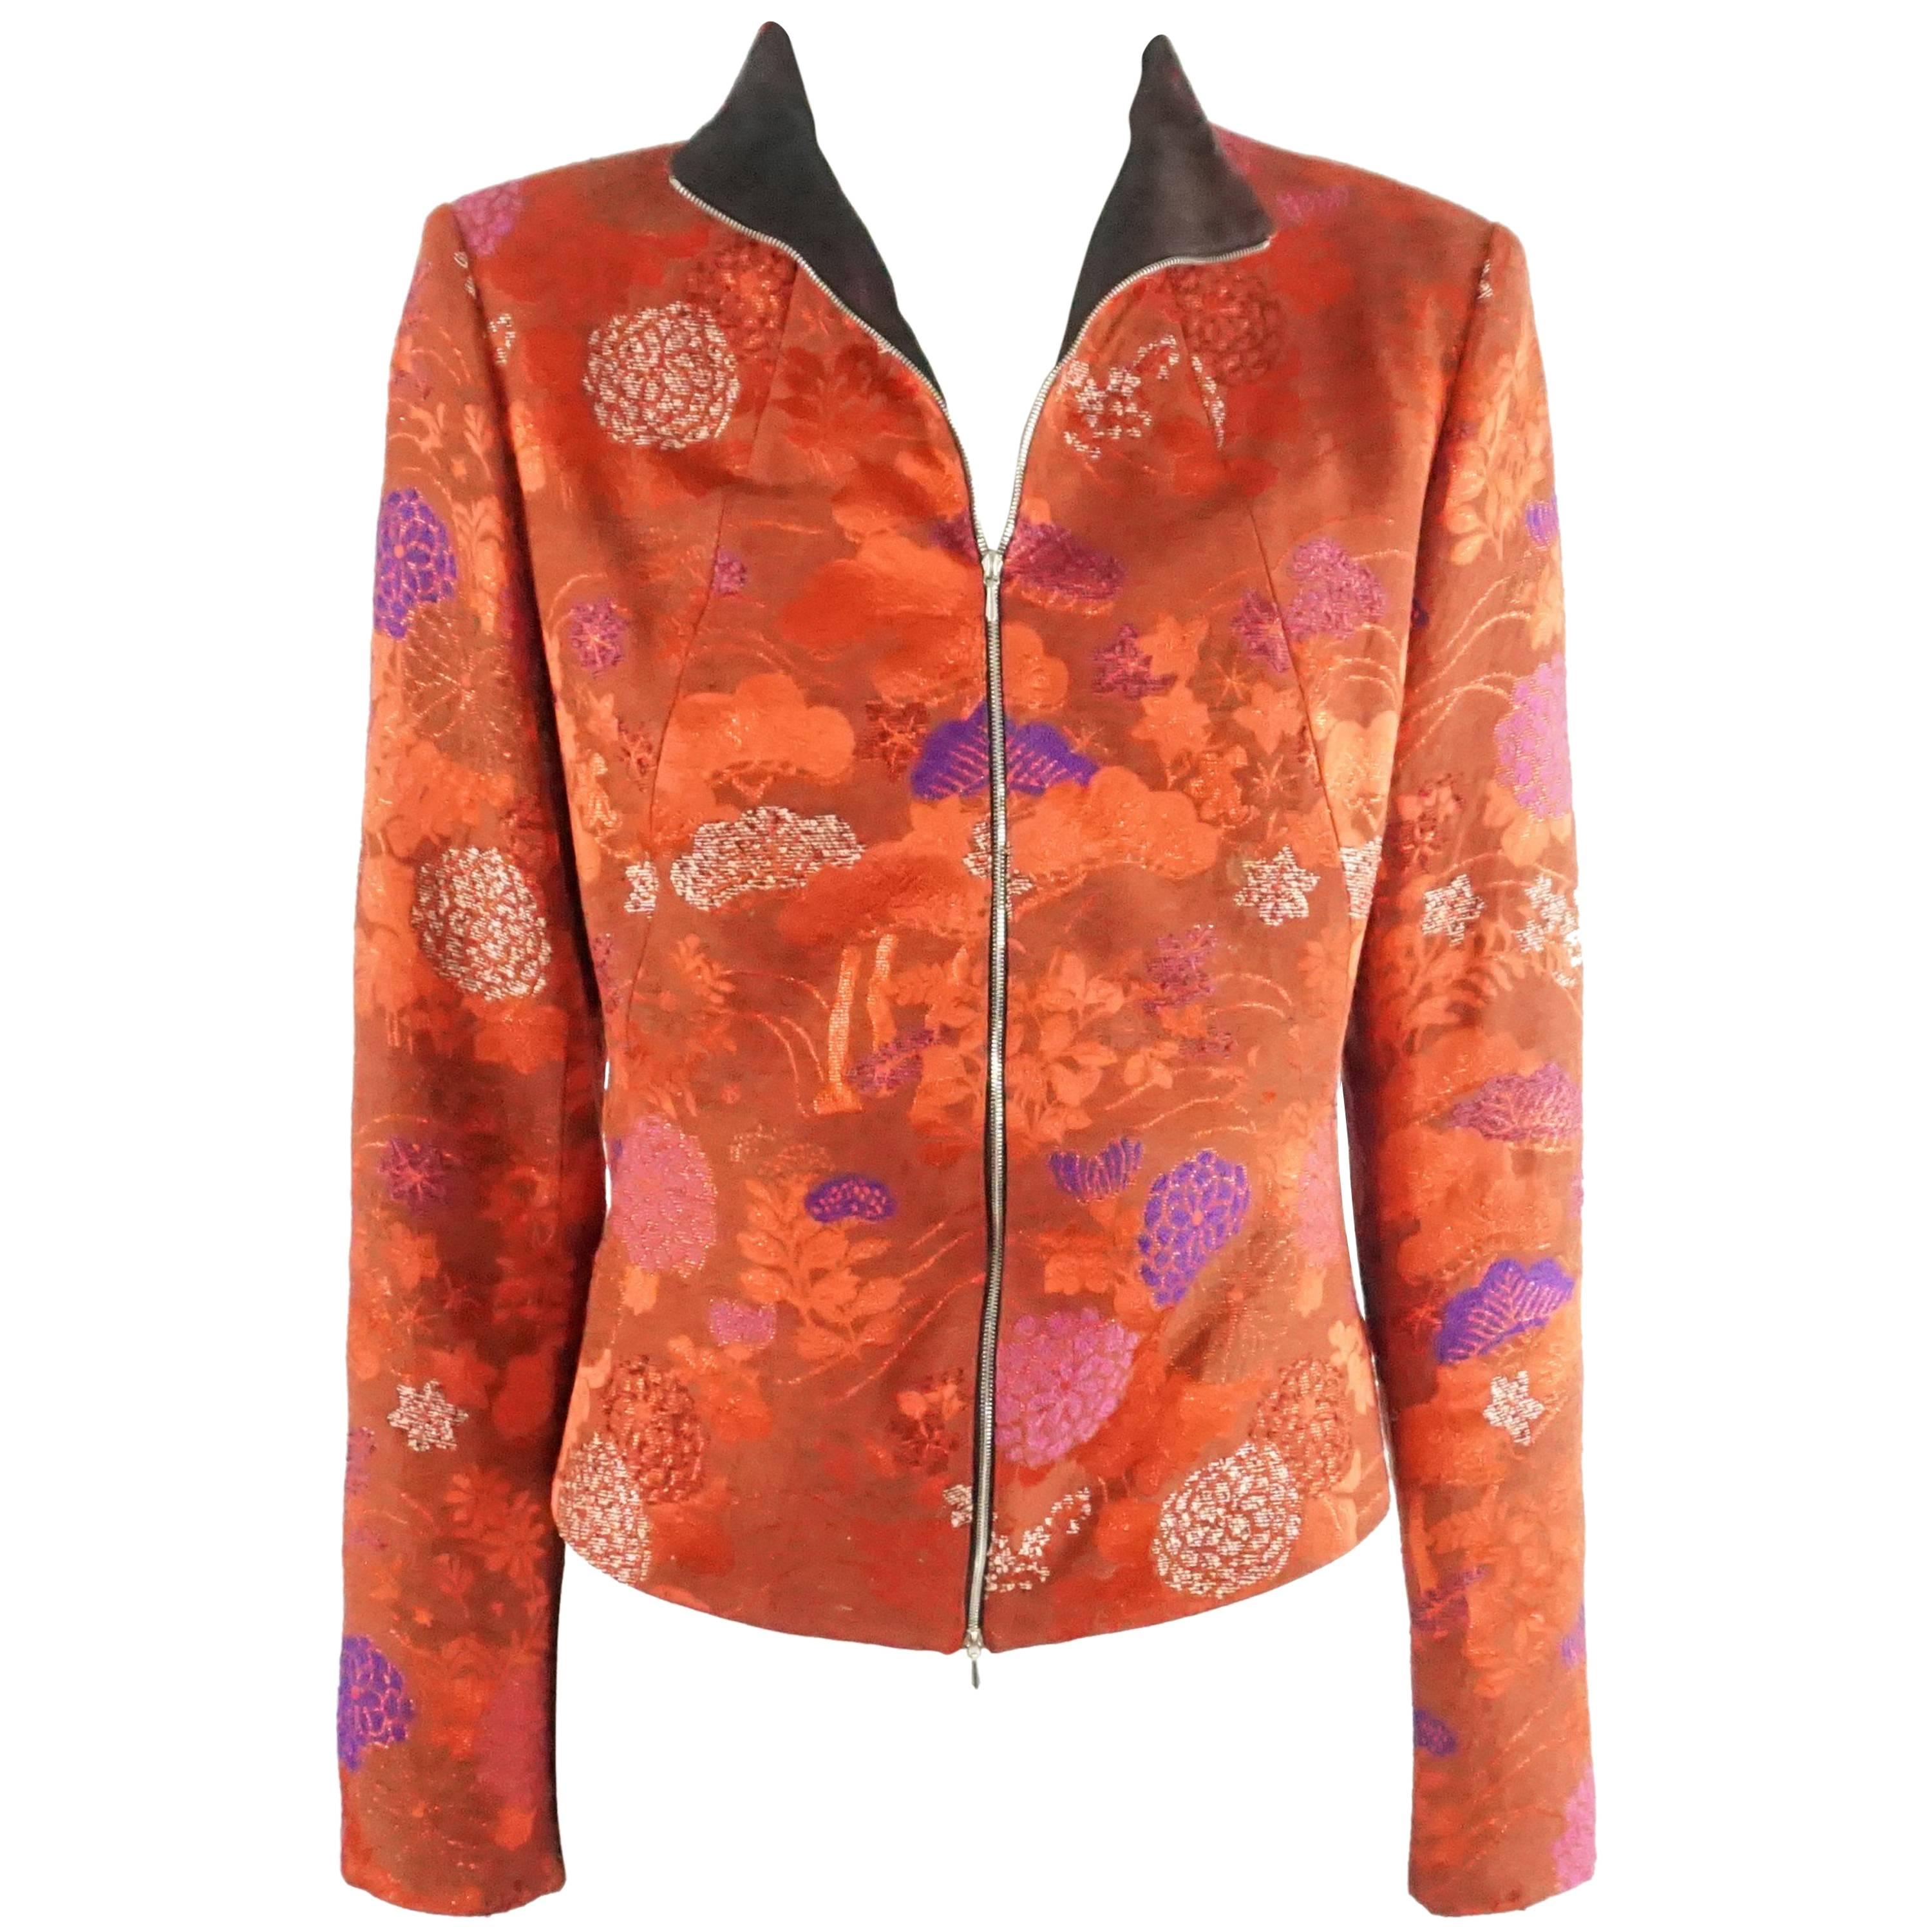 Kenzo Red and Metallic Asian Print Jacket with red silk pants - 44